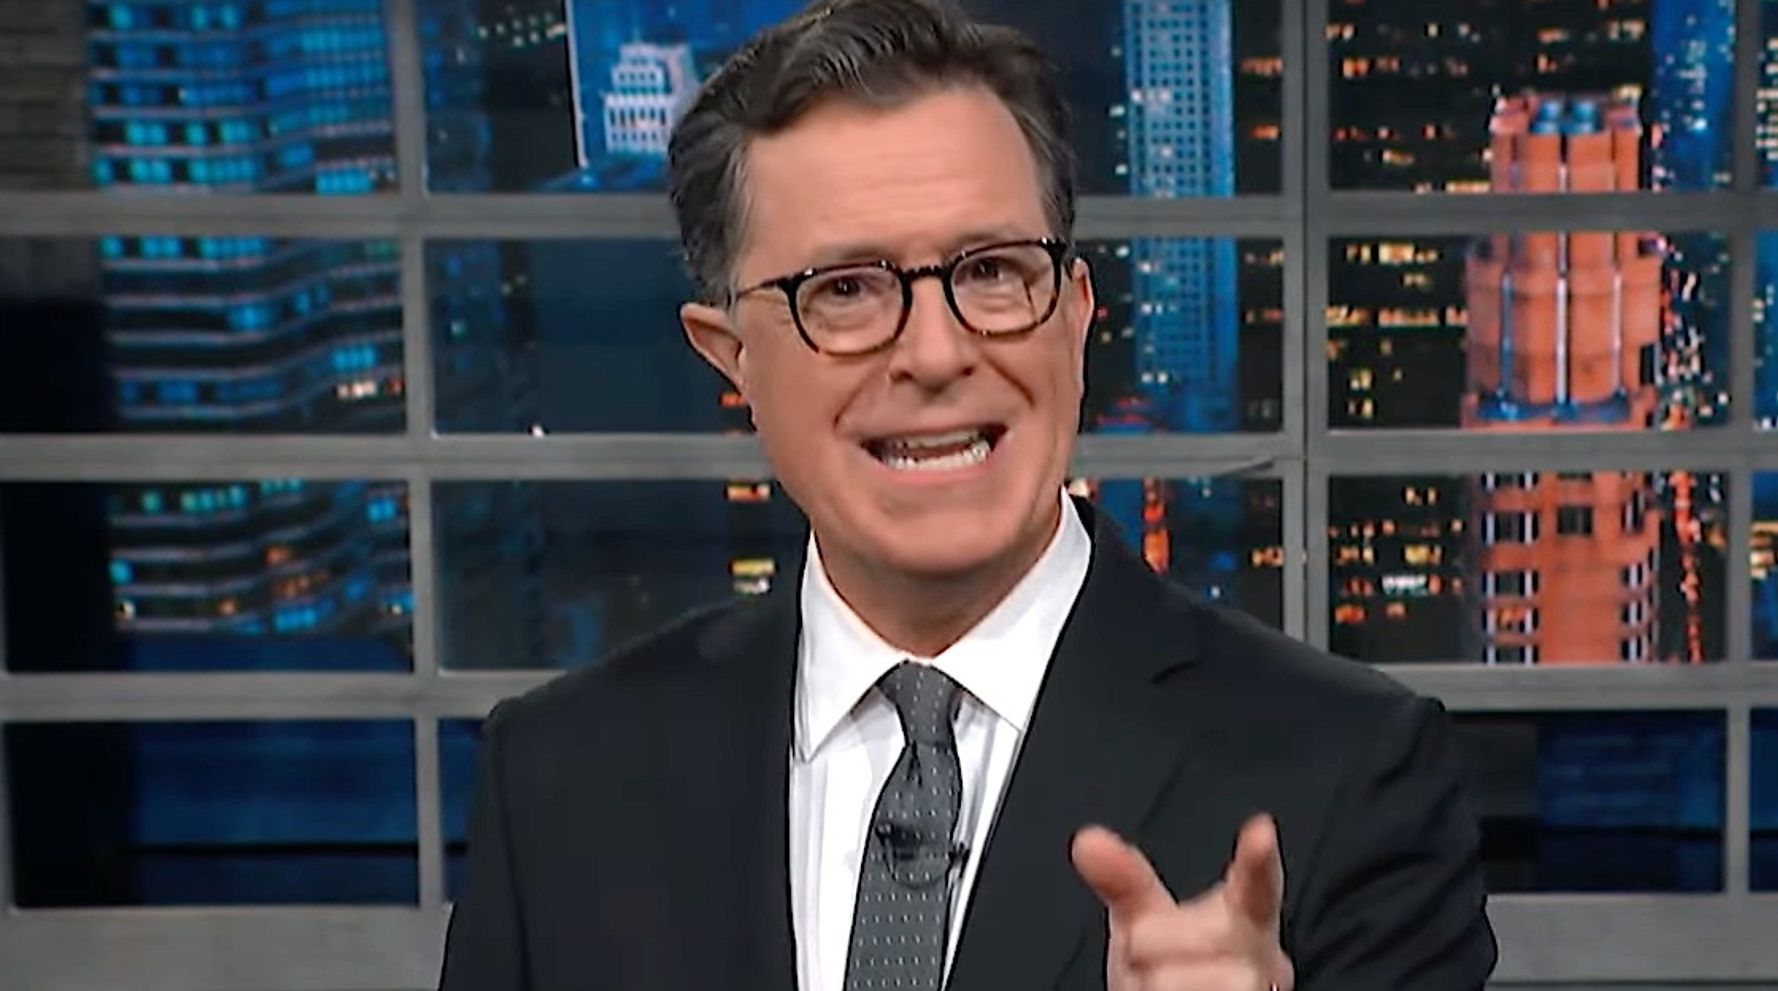 Stephen Colbert Offers Up Some Blunt Prison Advice For Jan. 6 Riot Suspects